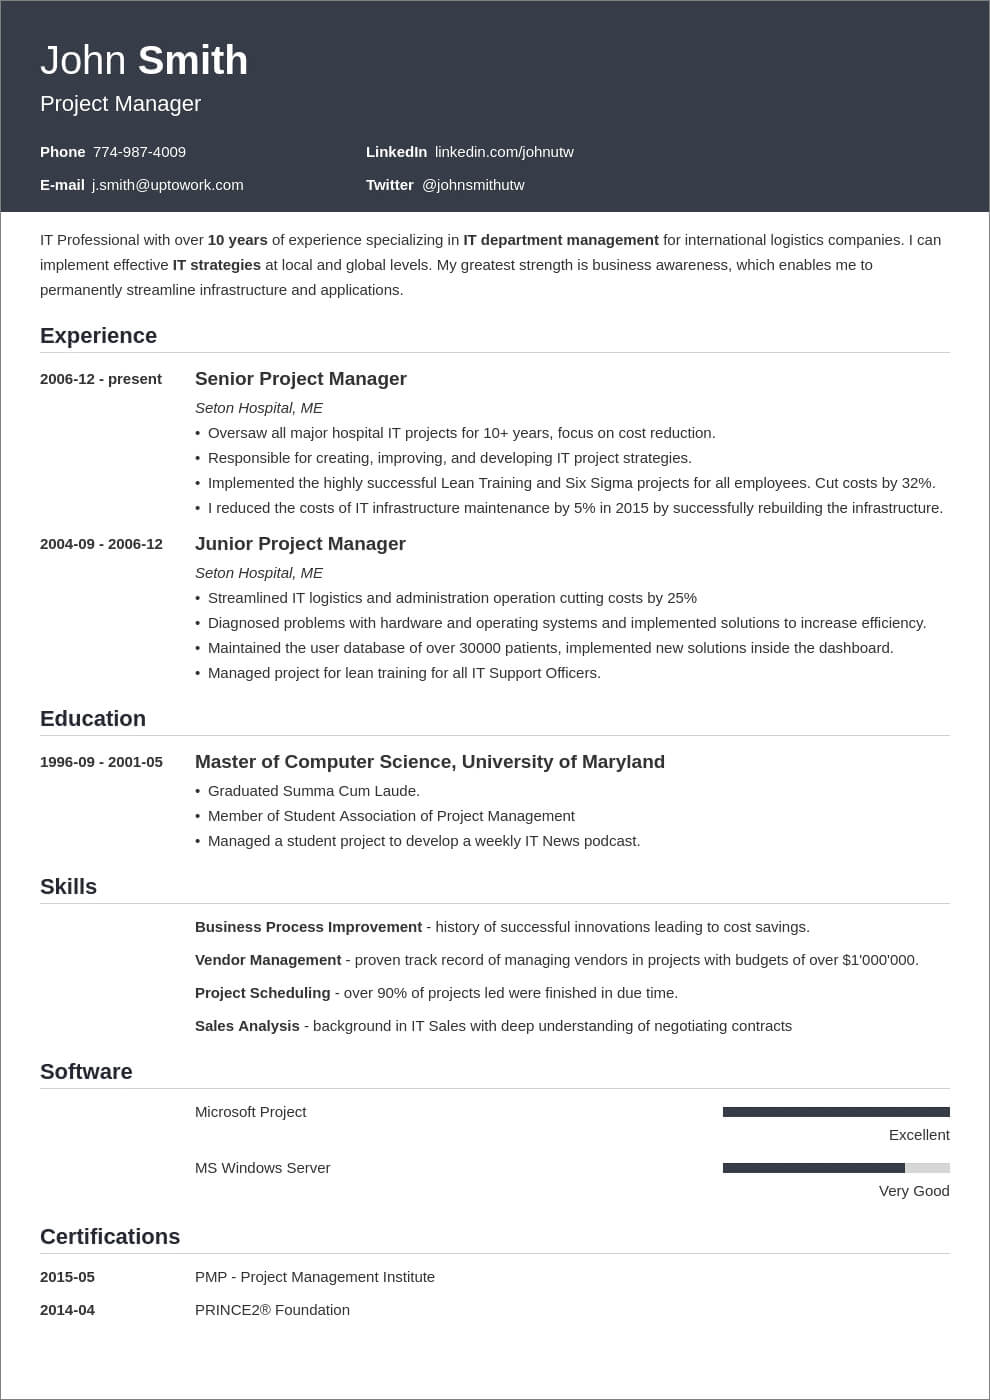 ats-compliant resume template free download